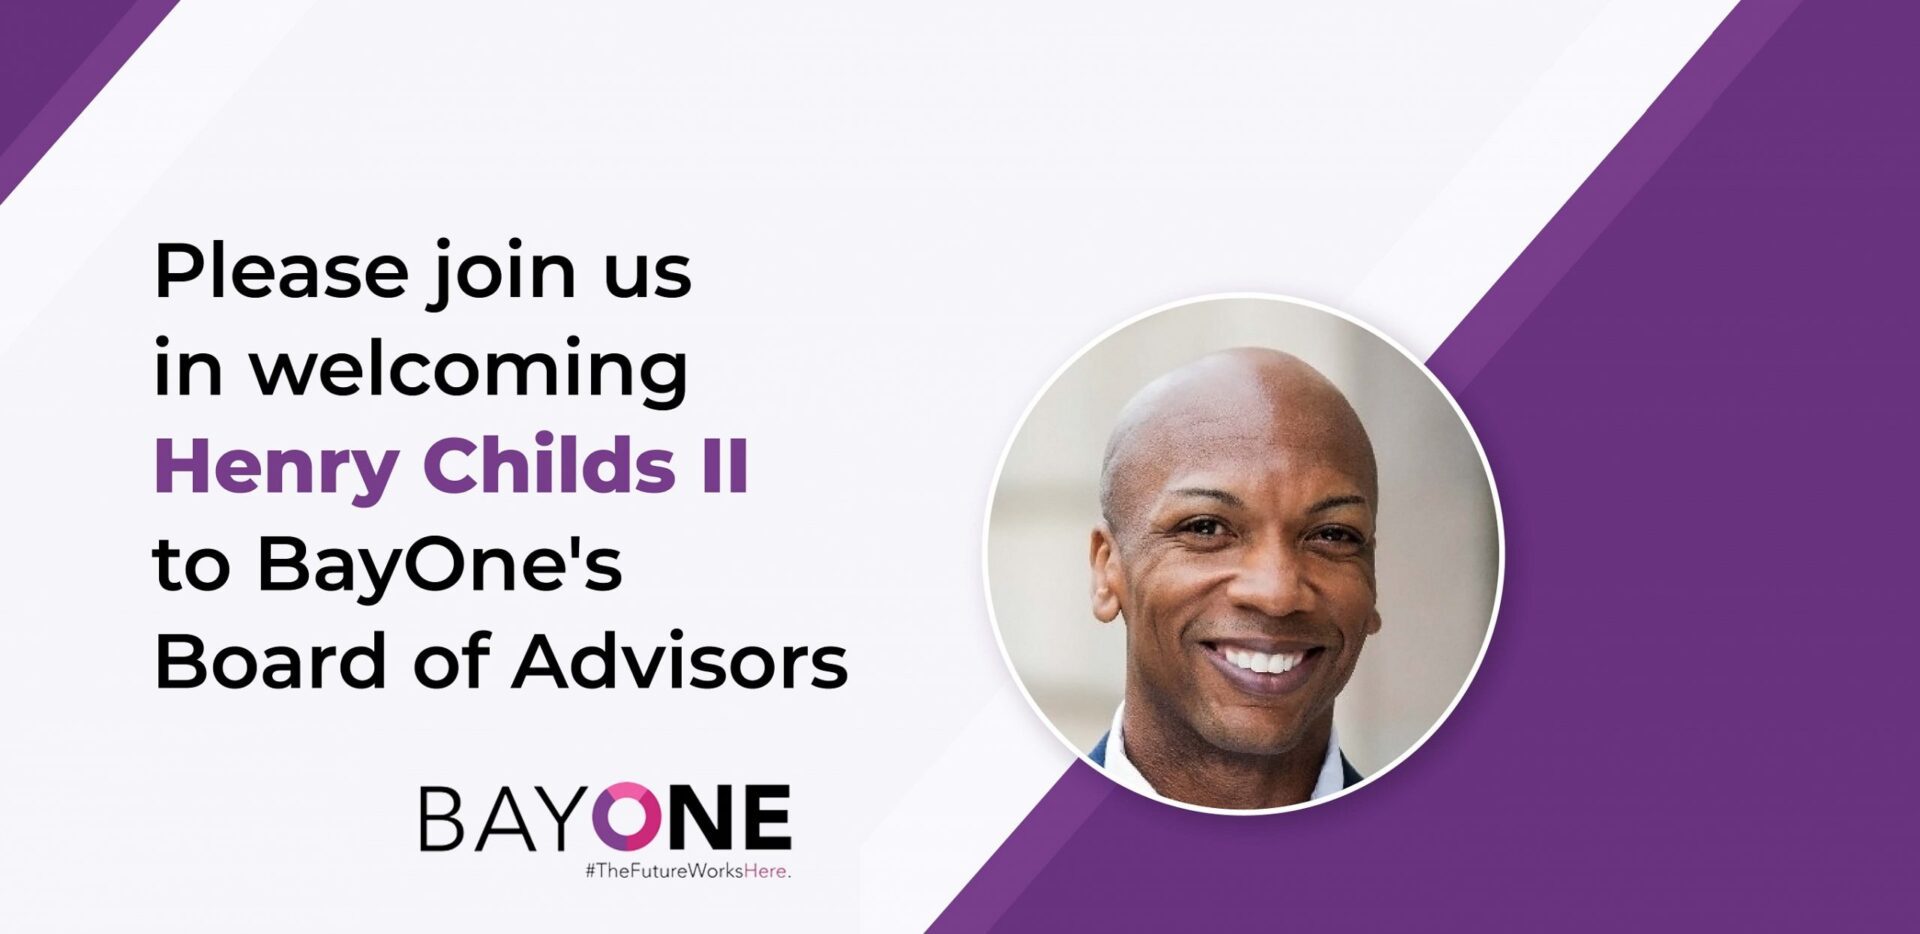 BayOne Welcomes Henry Childs II to the Board of Advisors